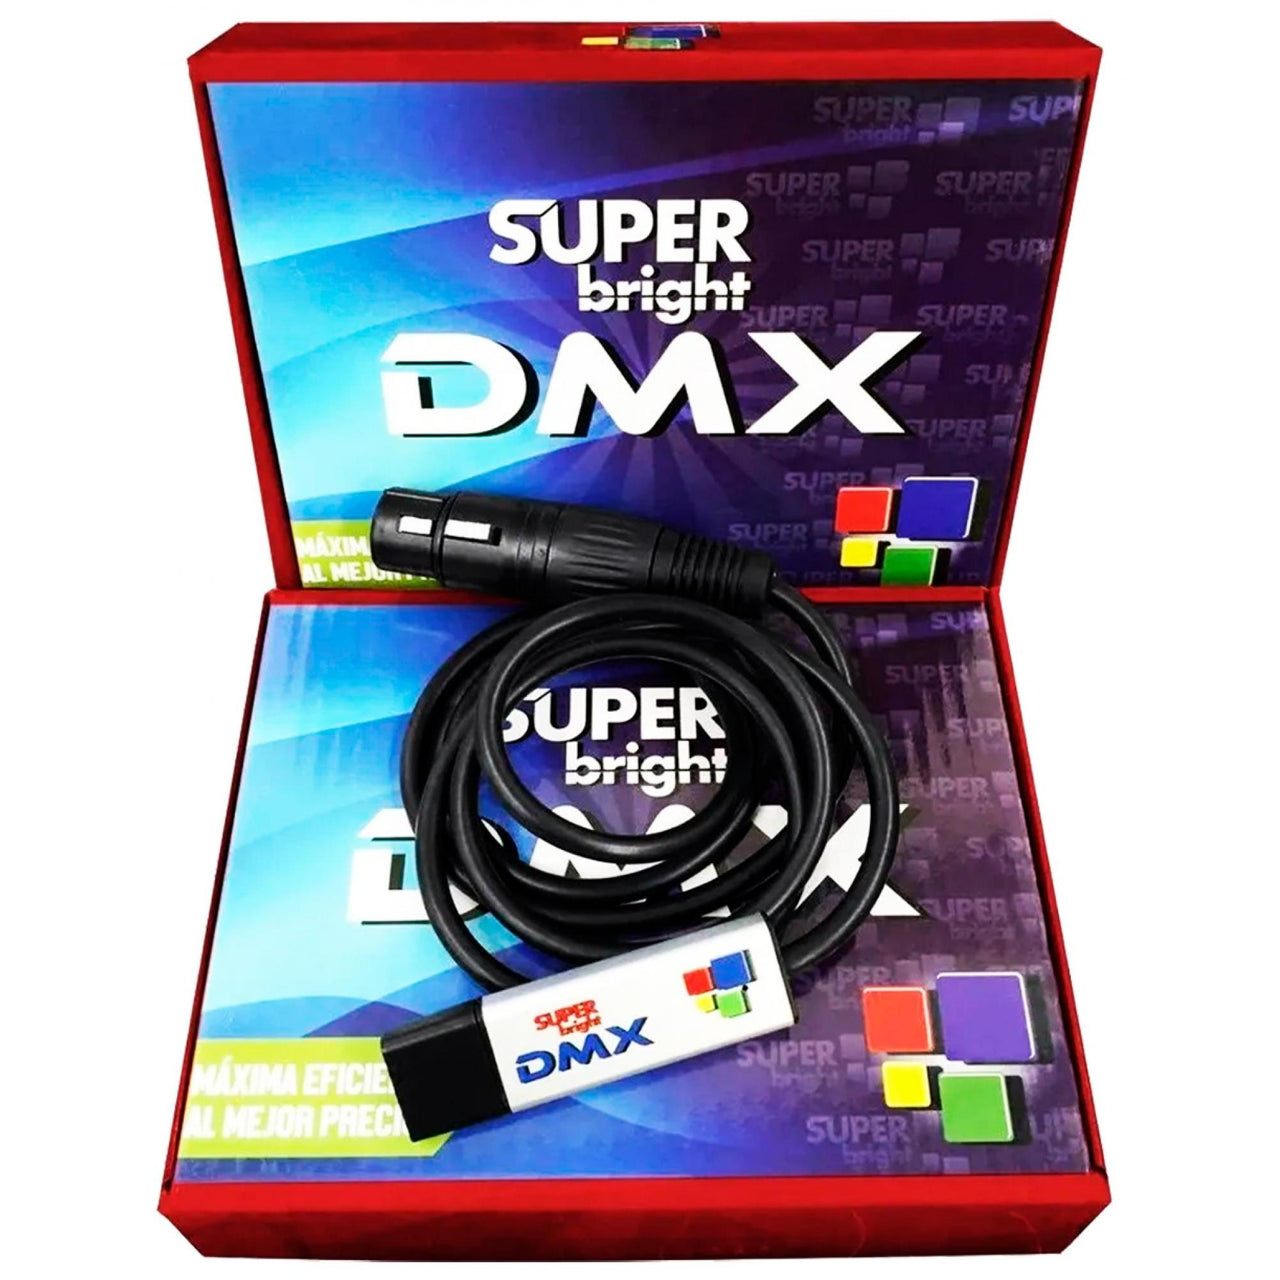 Interface Super bright Usb Dmx Freestyler 512 Canales